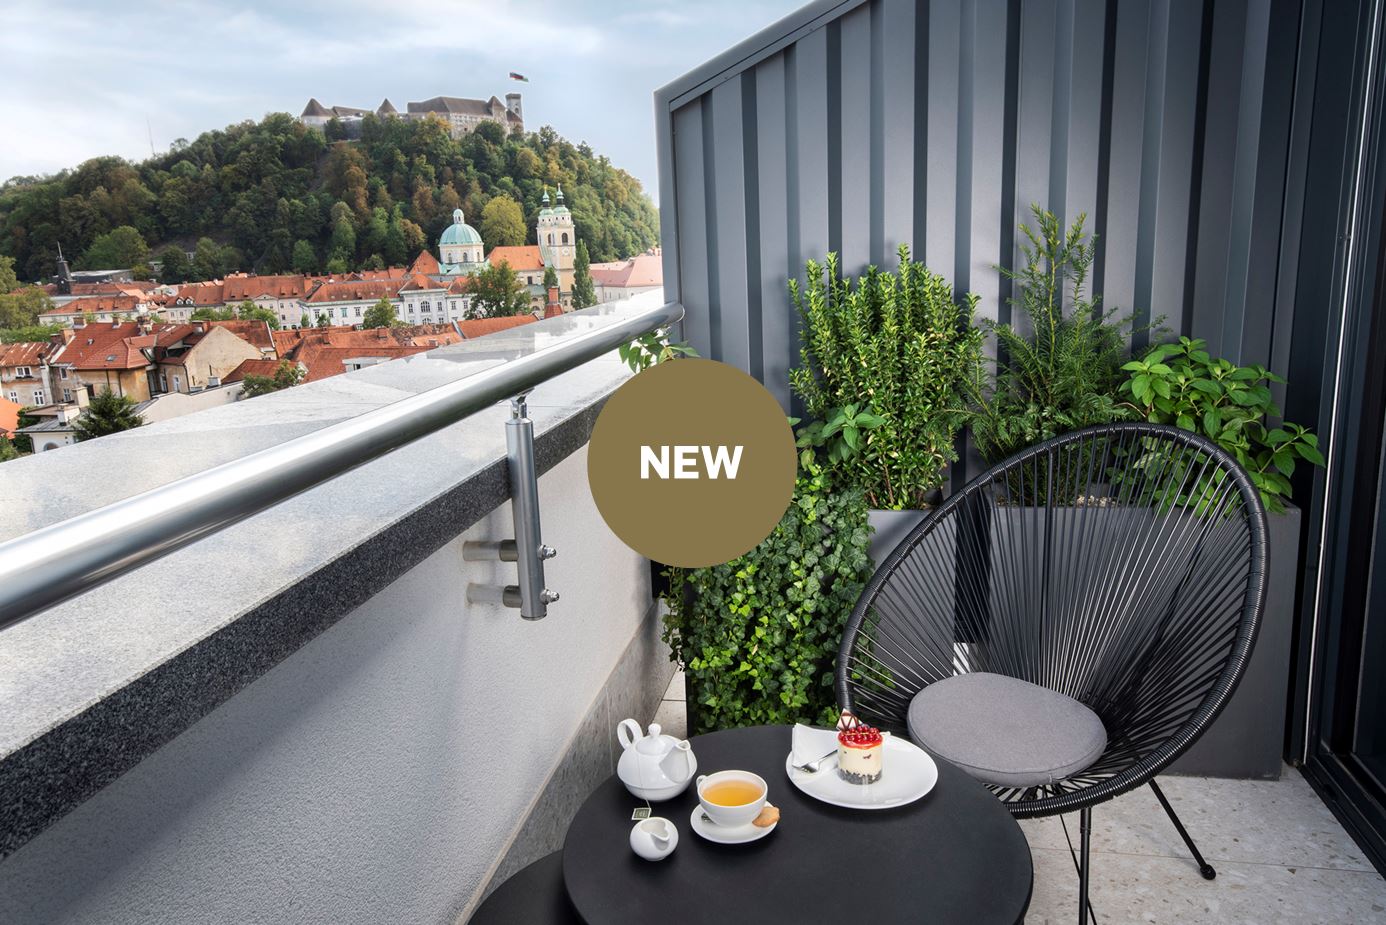 7th floor Deluxe terrace rooms and Above the City Suite now with a special 30% discount on your stay until April 6h 2023.